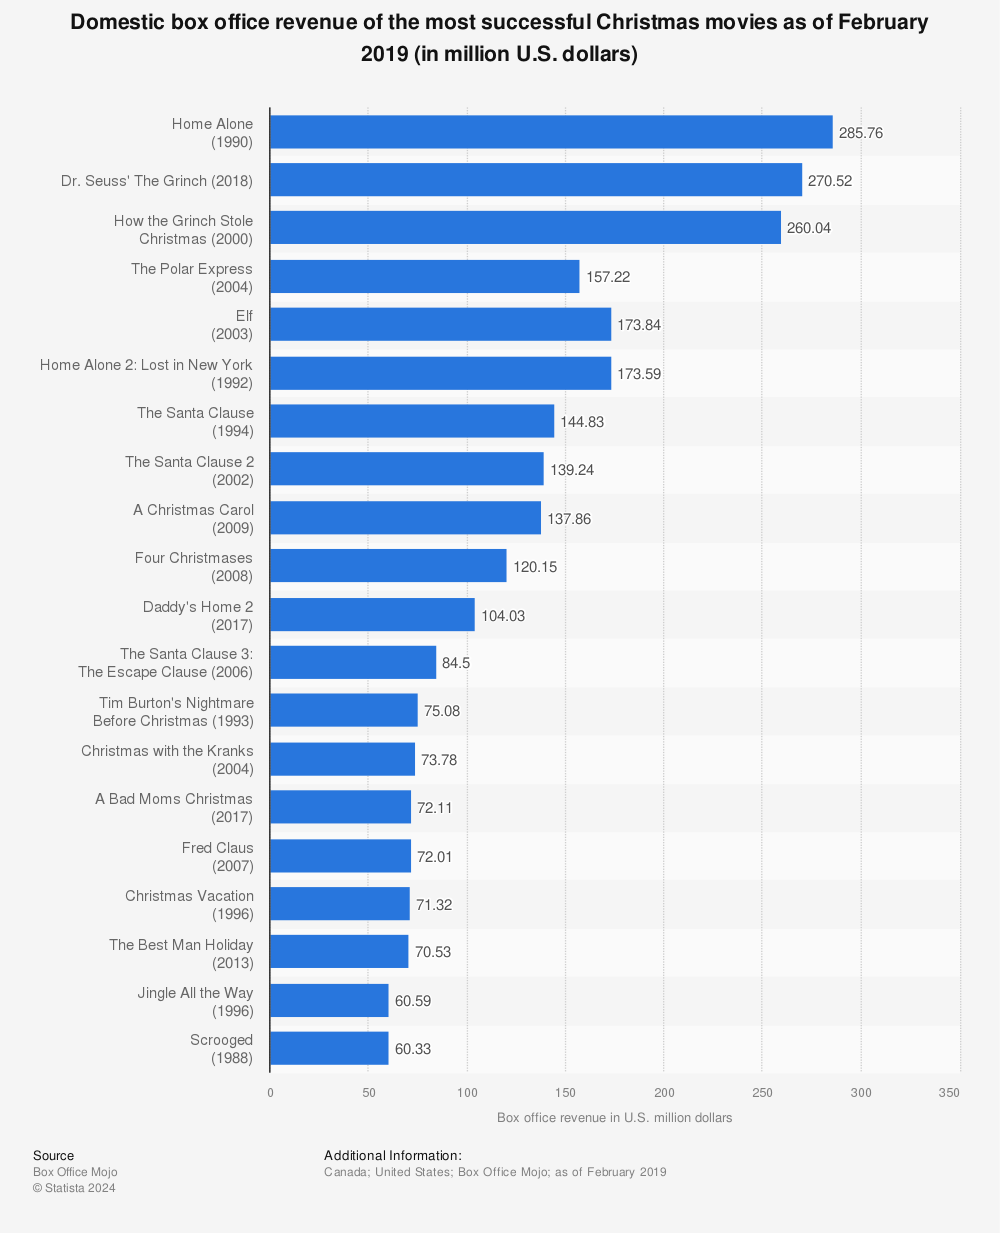 Statistic: Domestic box office revenue of the most successful Christmas movies as of February 2019 (in million U.S. dollars) | Statista